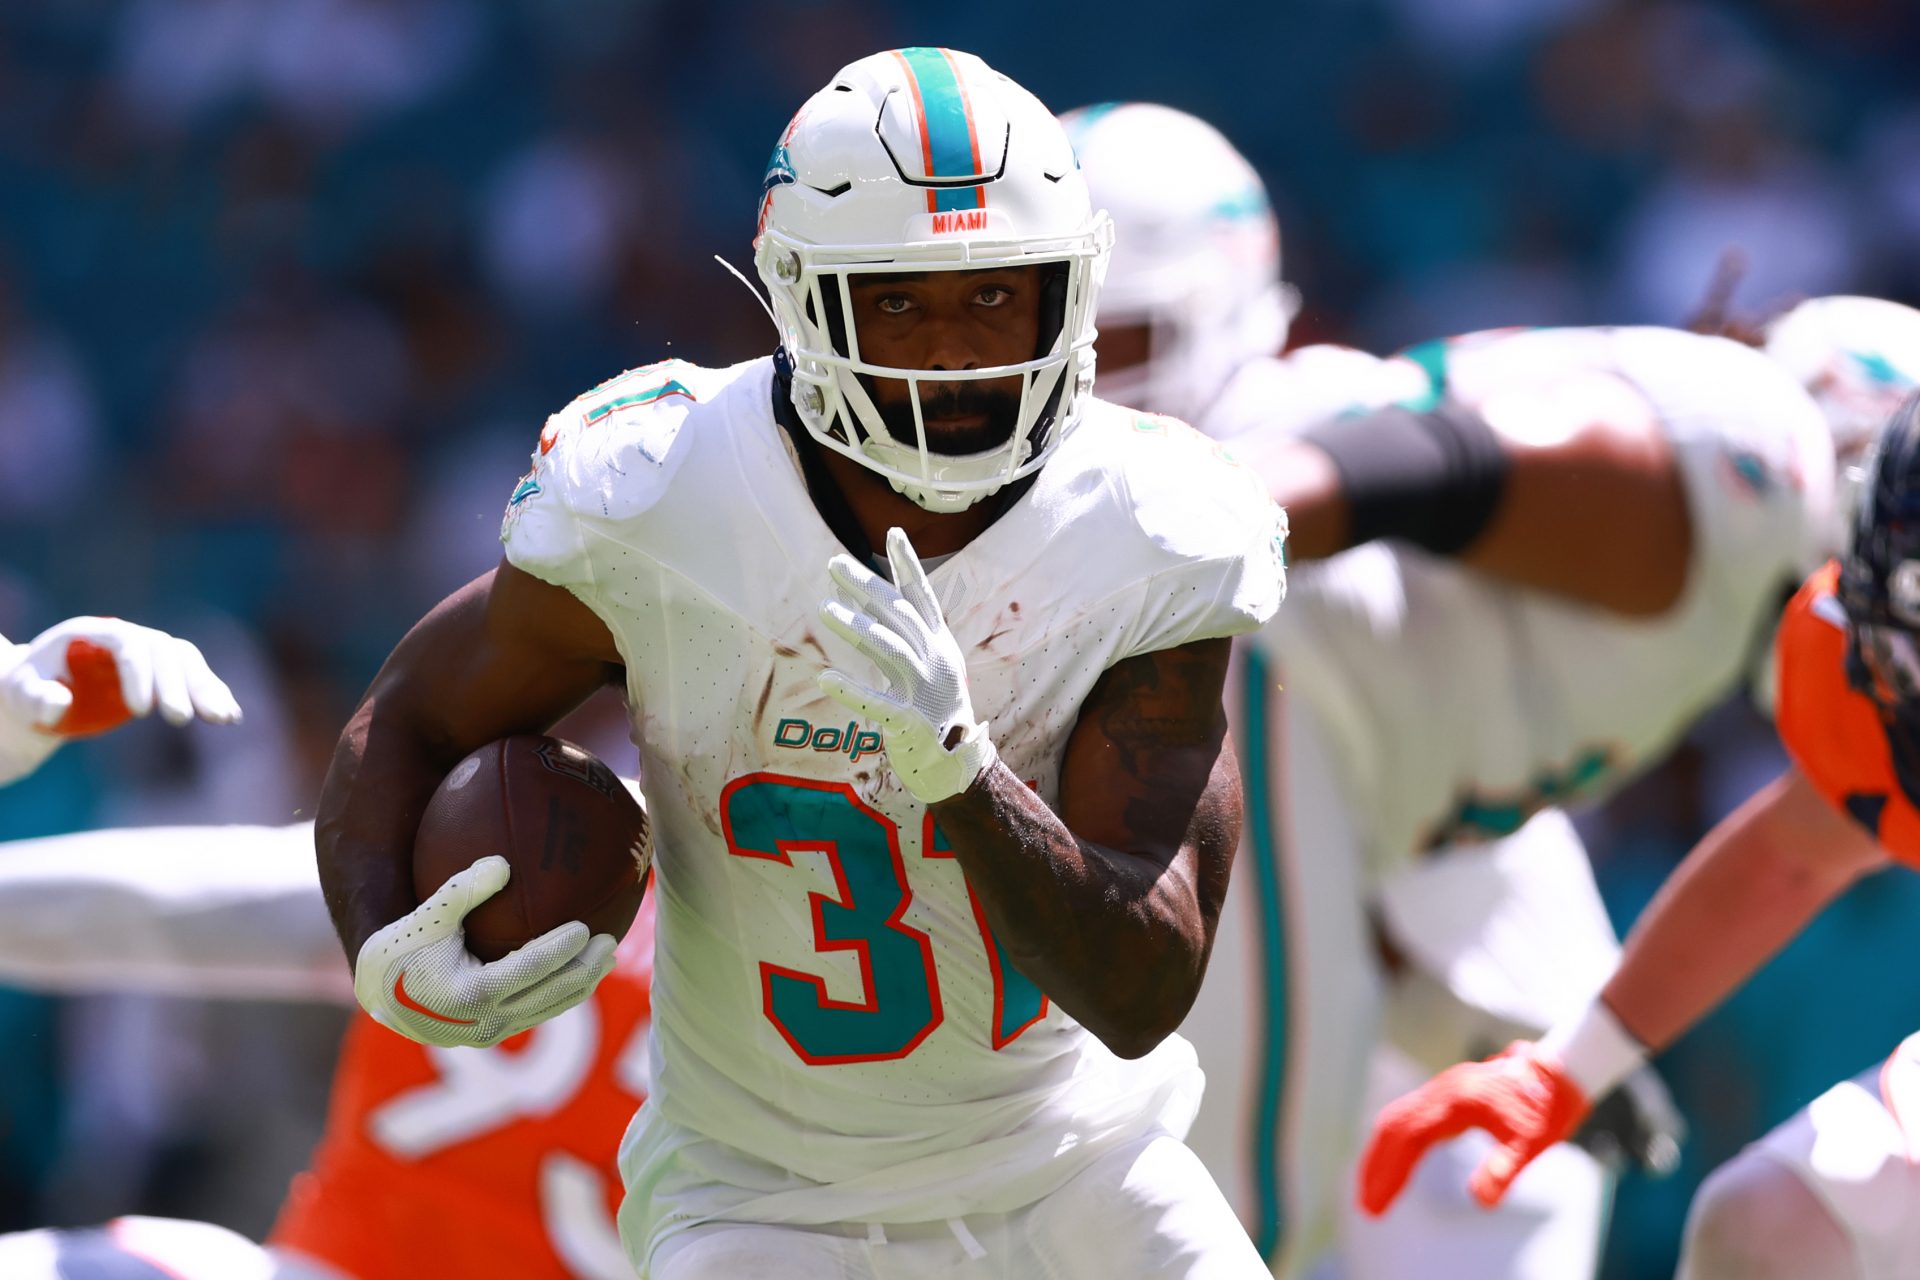 Miami’s Rushing Attack Stymied